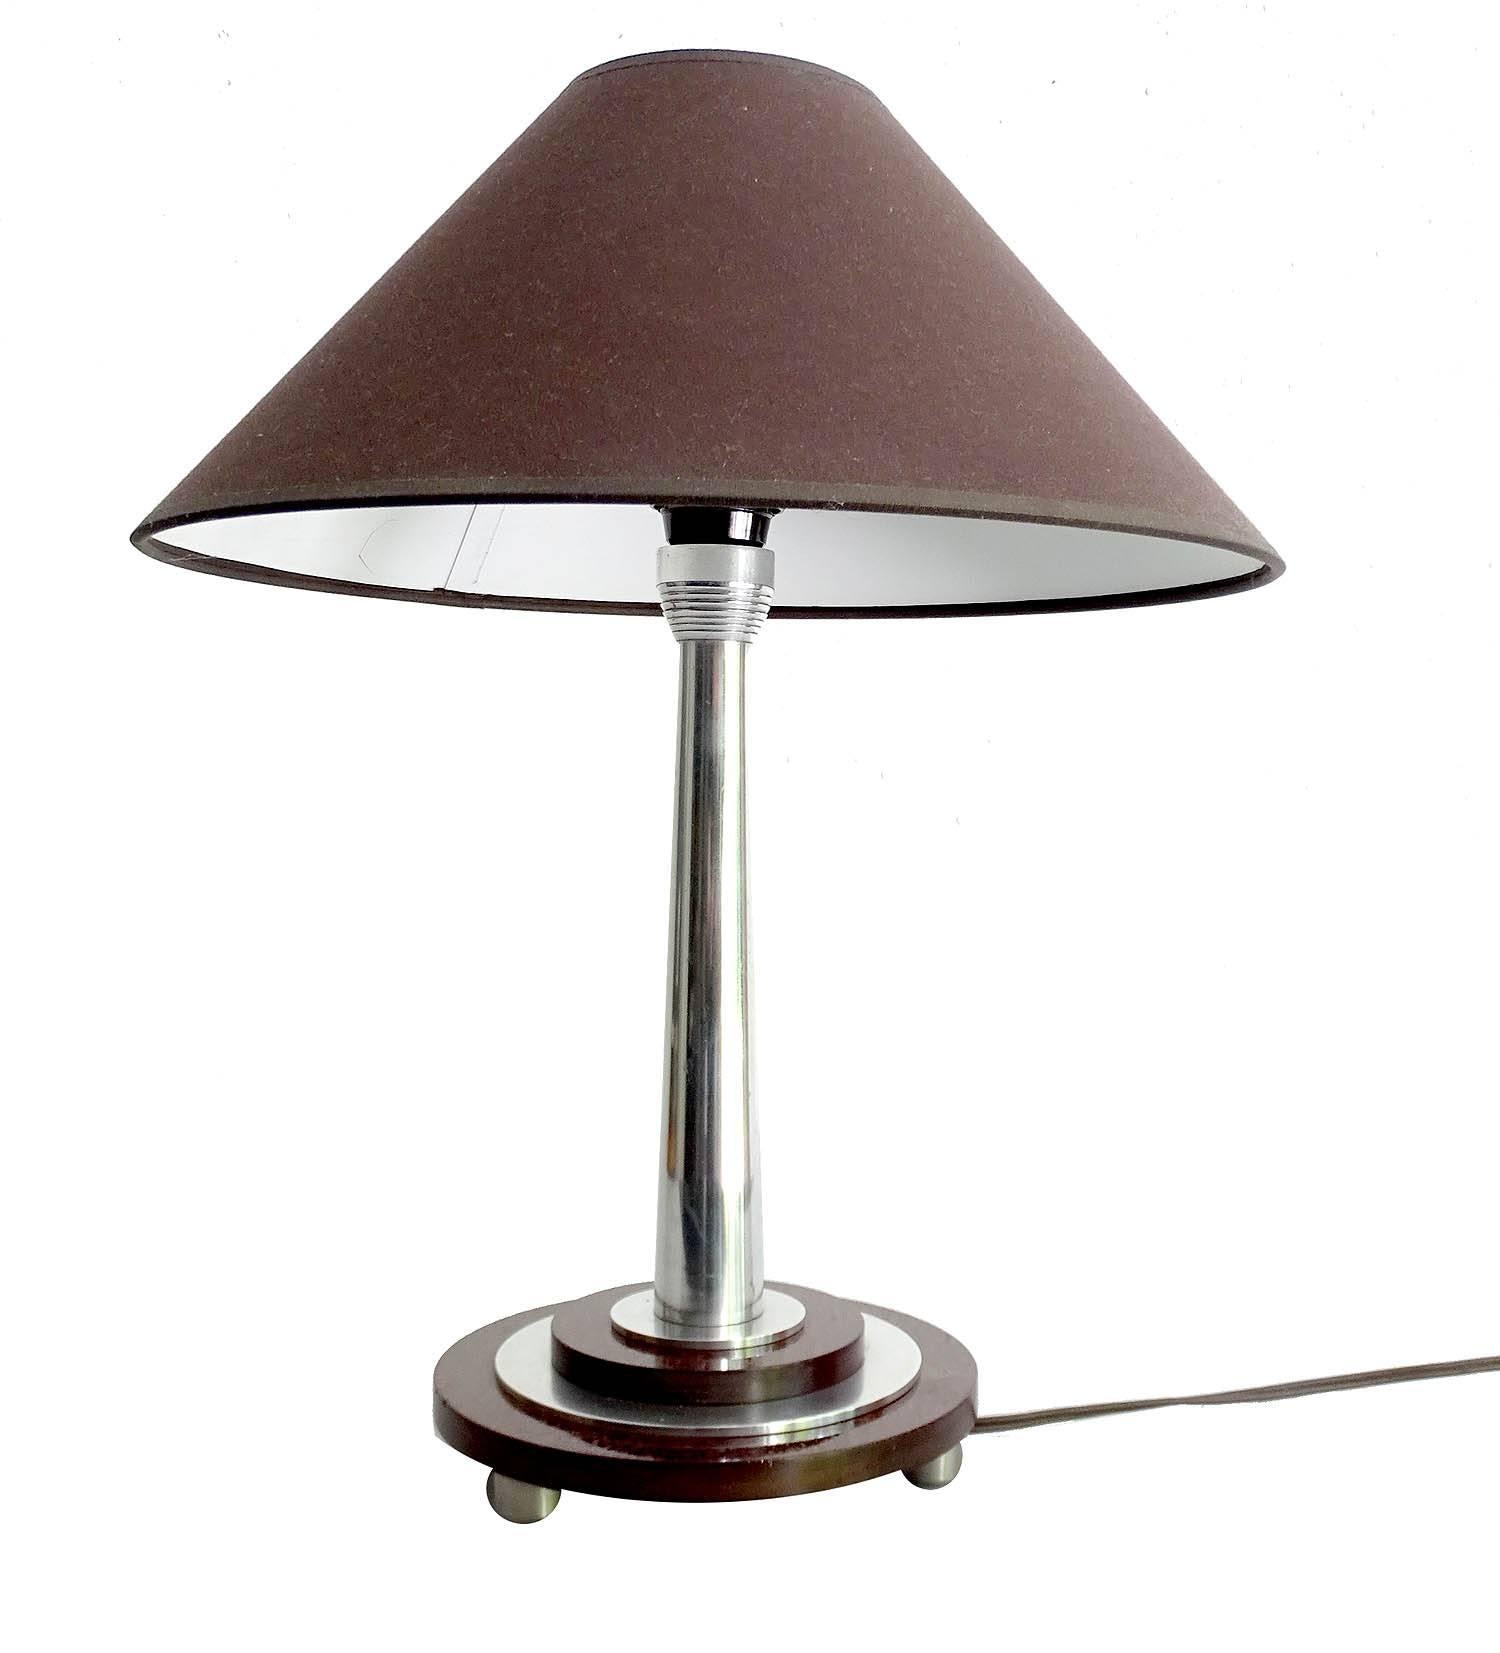 Pair of French Art Deco table lamps, very rare design featuring a polished metal and Bakelite stepped base, dark brown fabric shade.

One standard bulb each. - LED compatible

The Art Deco style name was derived from the Exposition Internationale